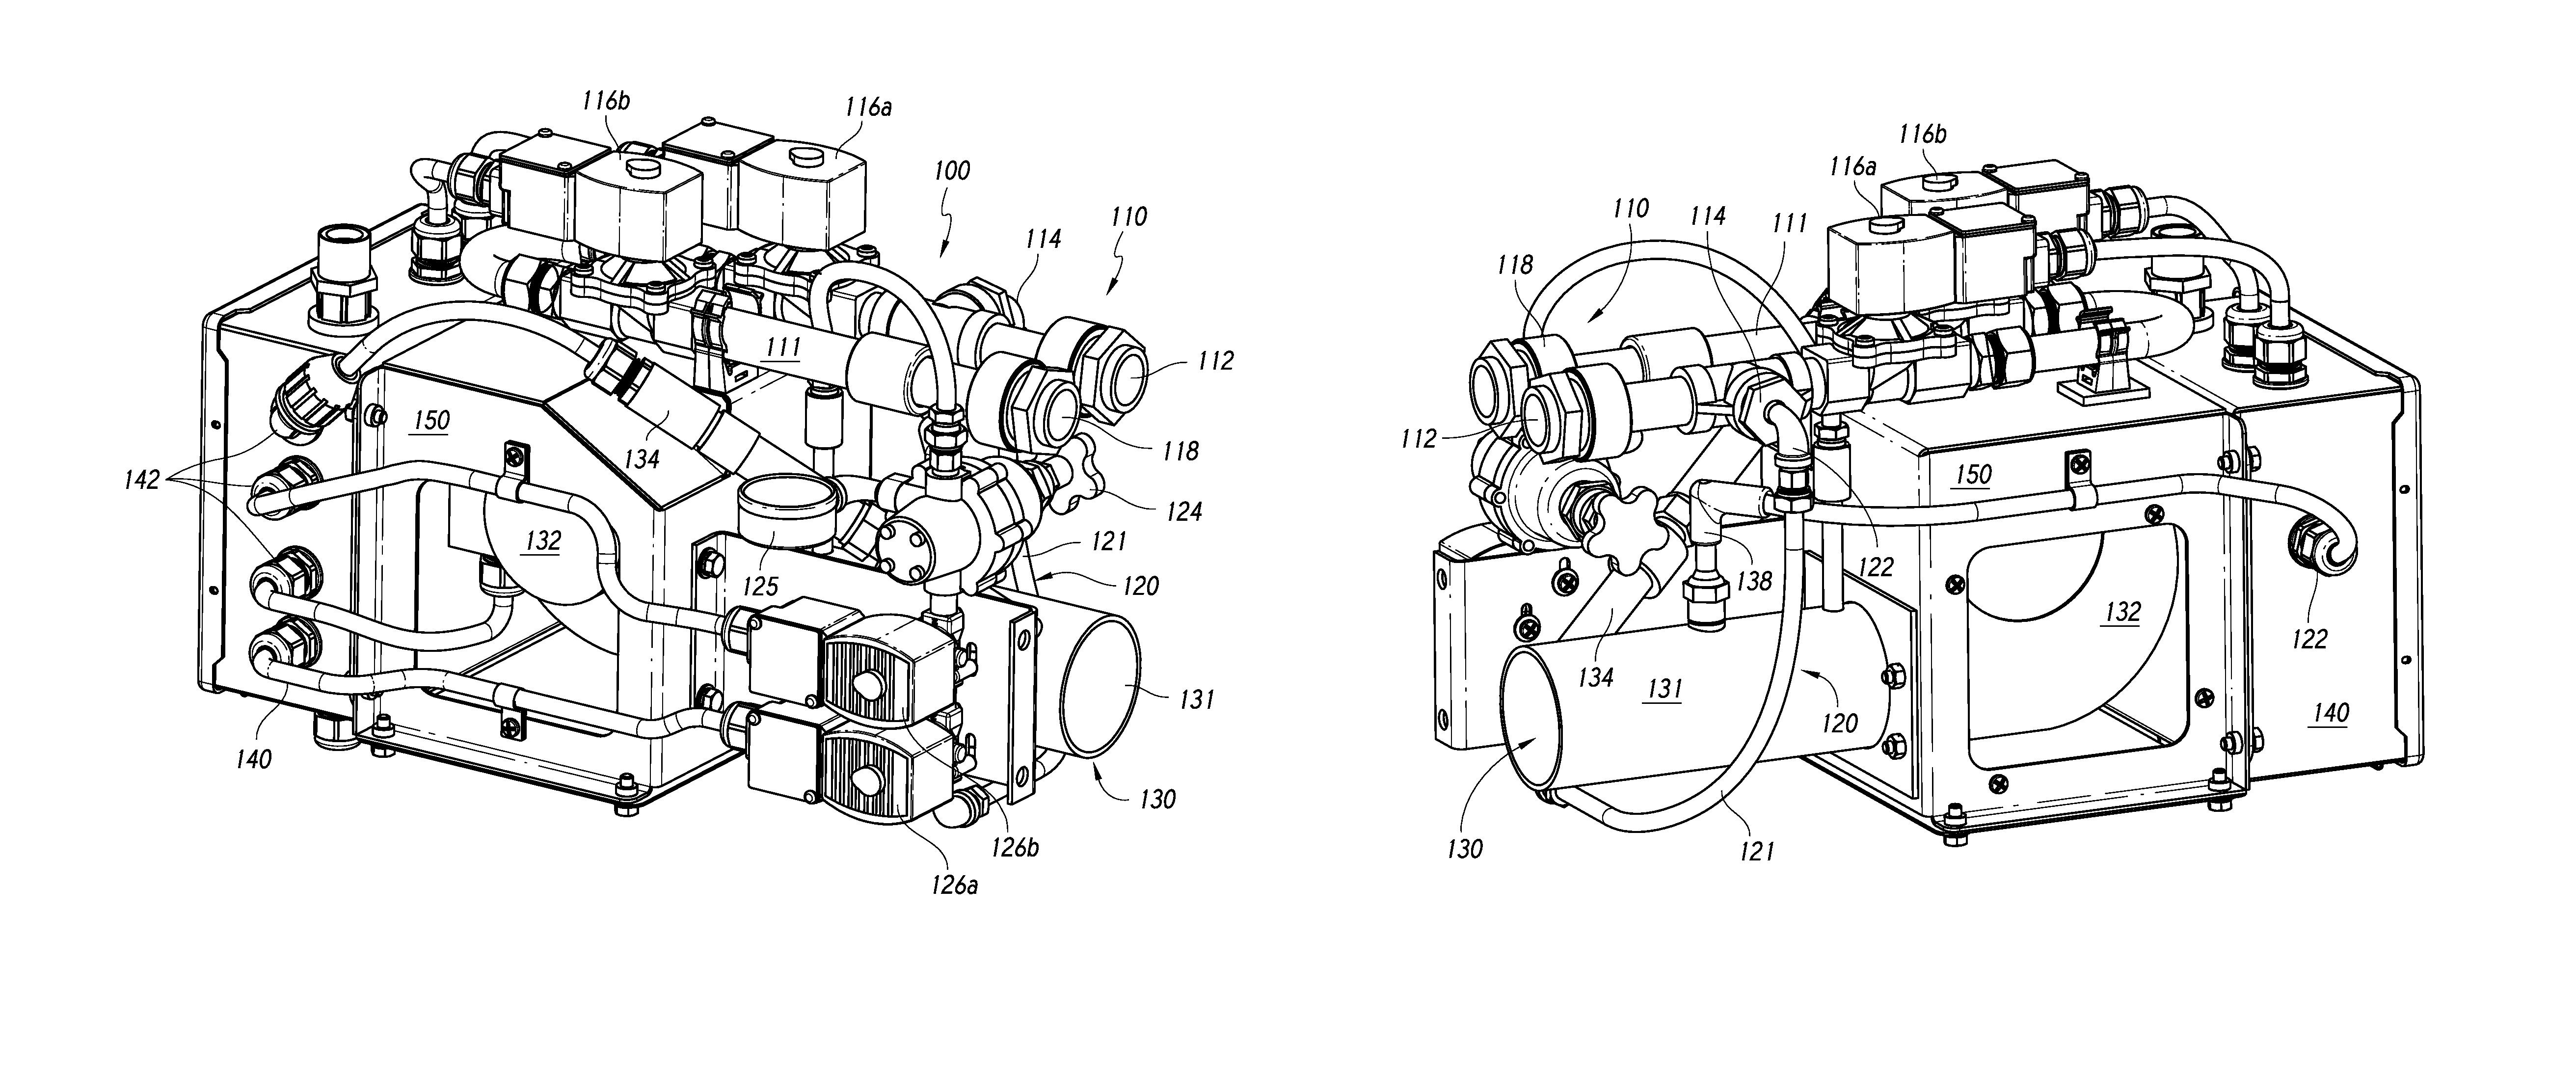 Pilot and burner system for firefighting training